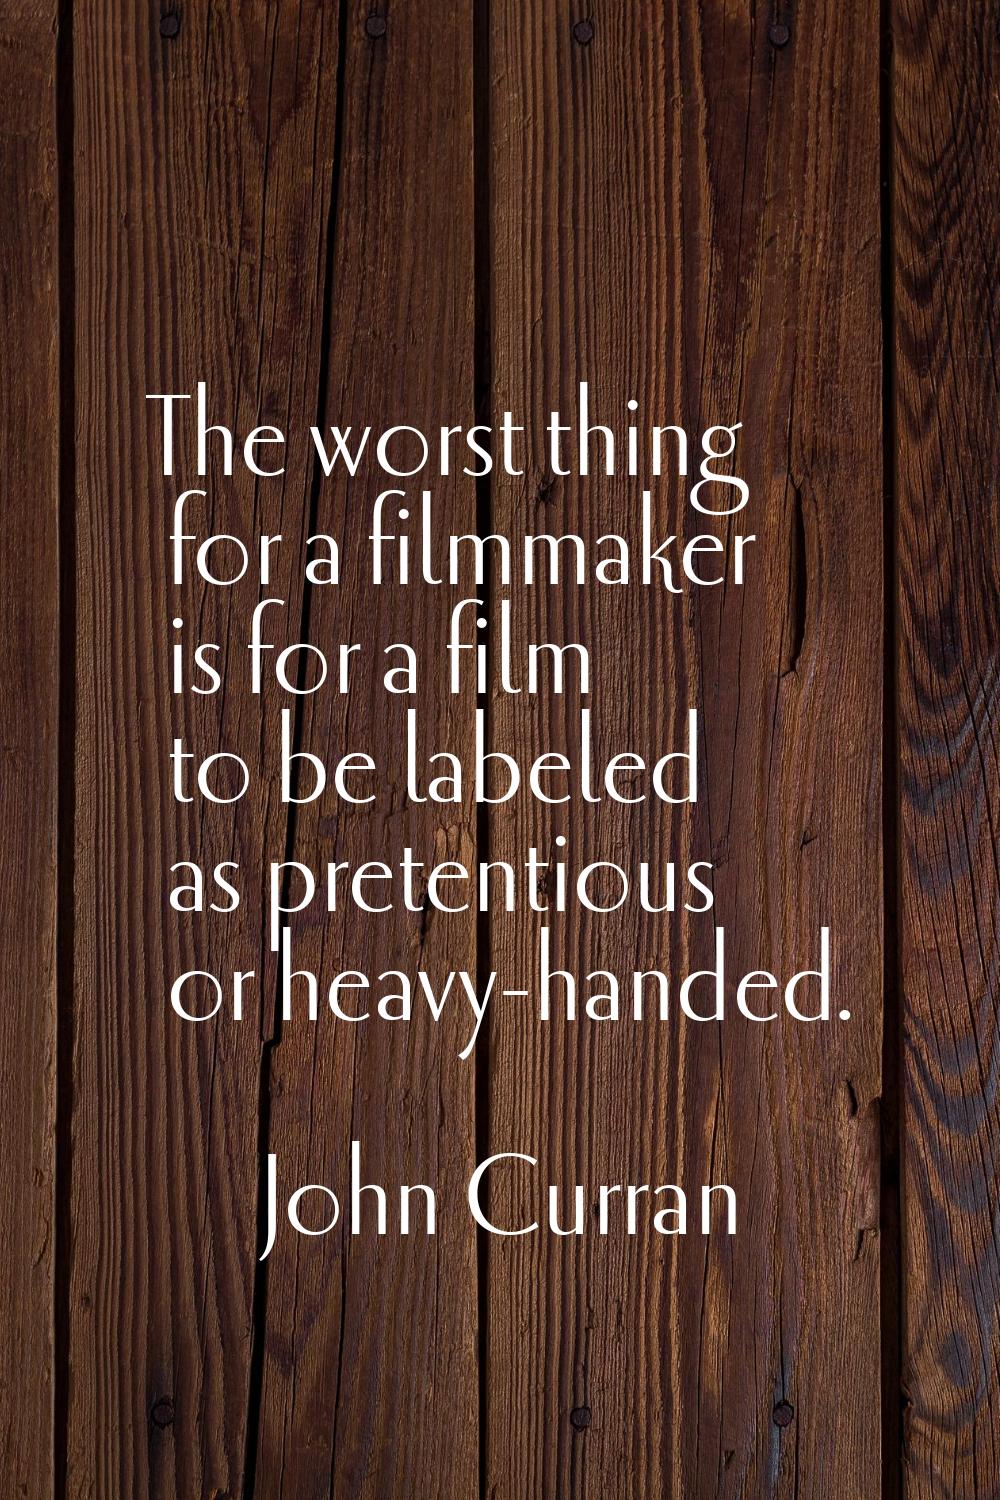 The worst thing for a filmmaker is for a film to be labeled as pretentious or heavy-handed.